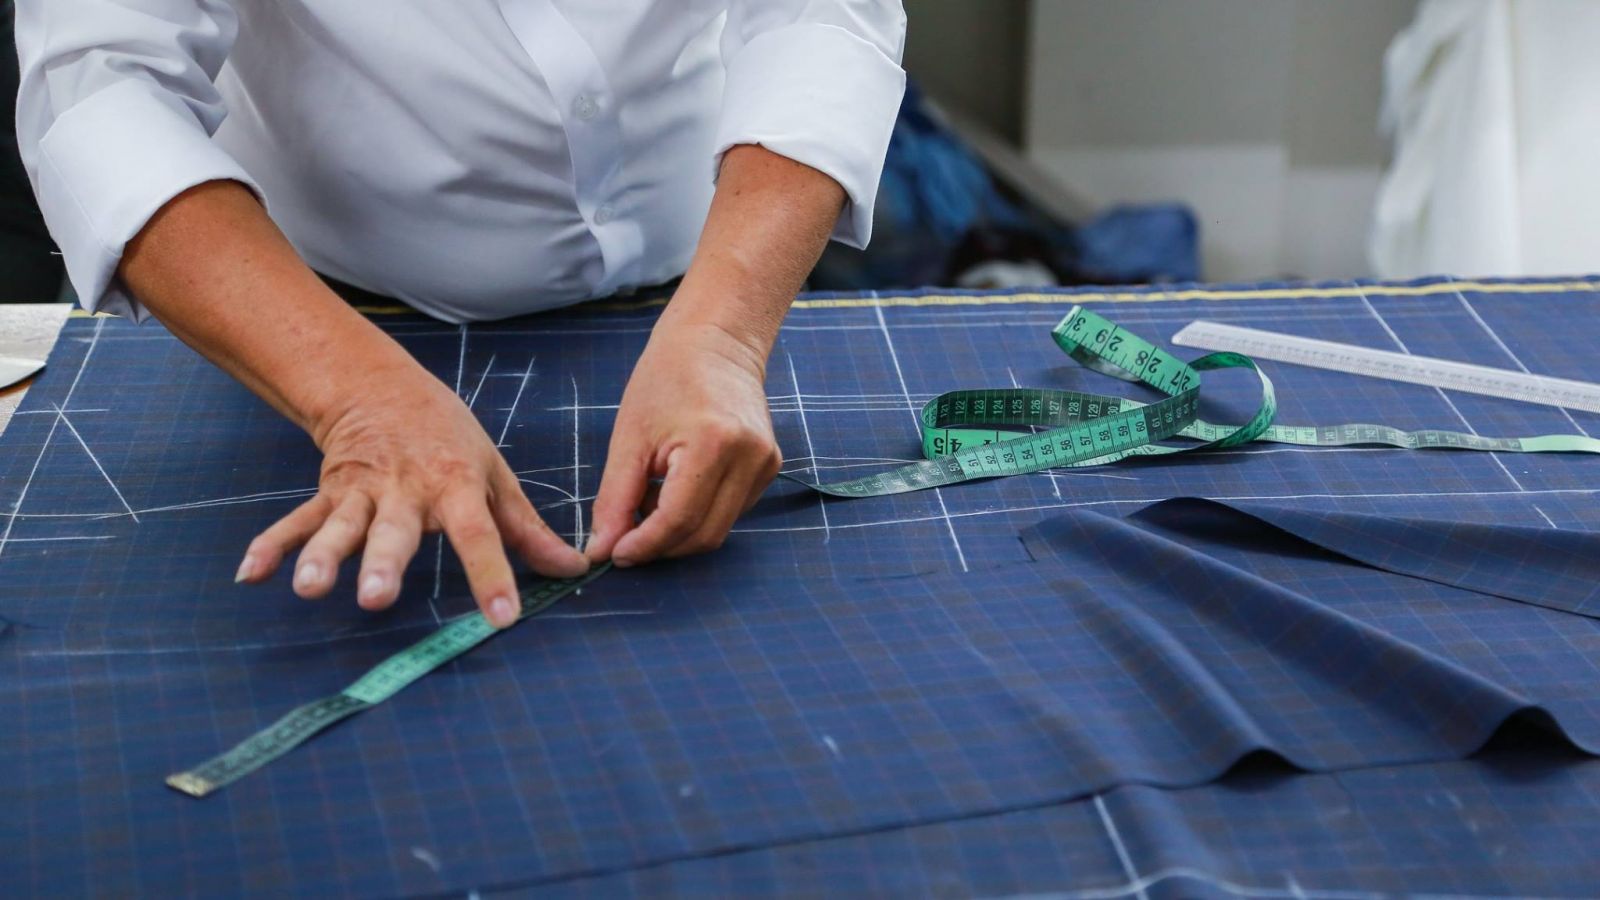 A Bespoke Suit 's required hours of handwork to be completed.